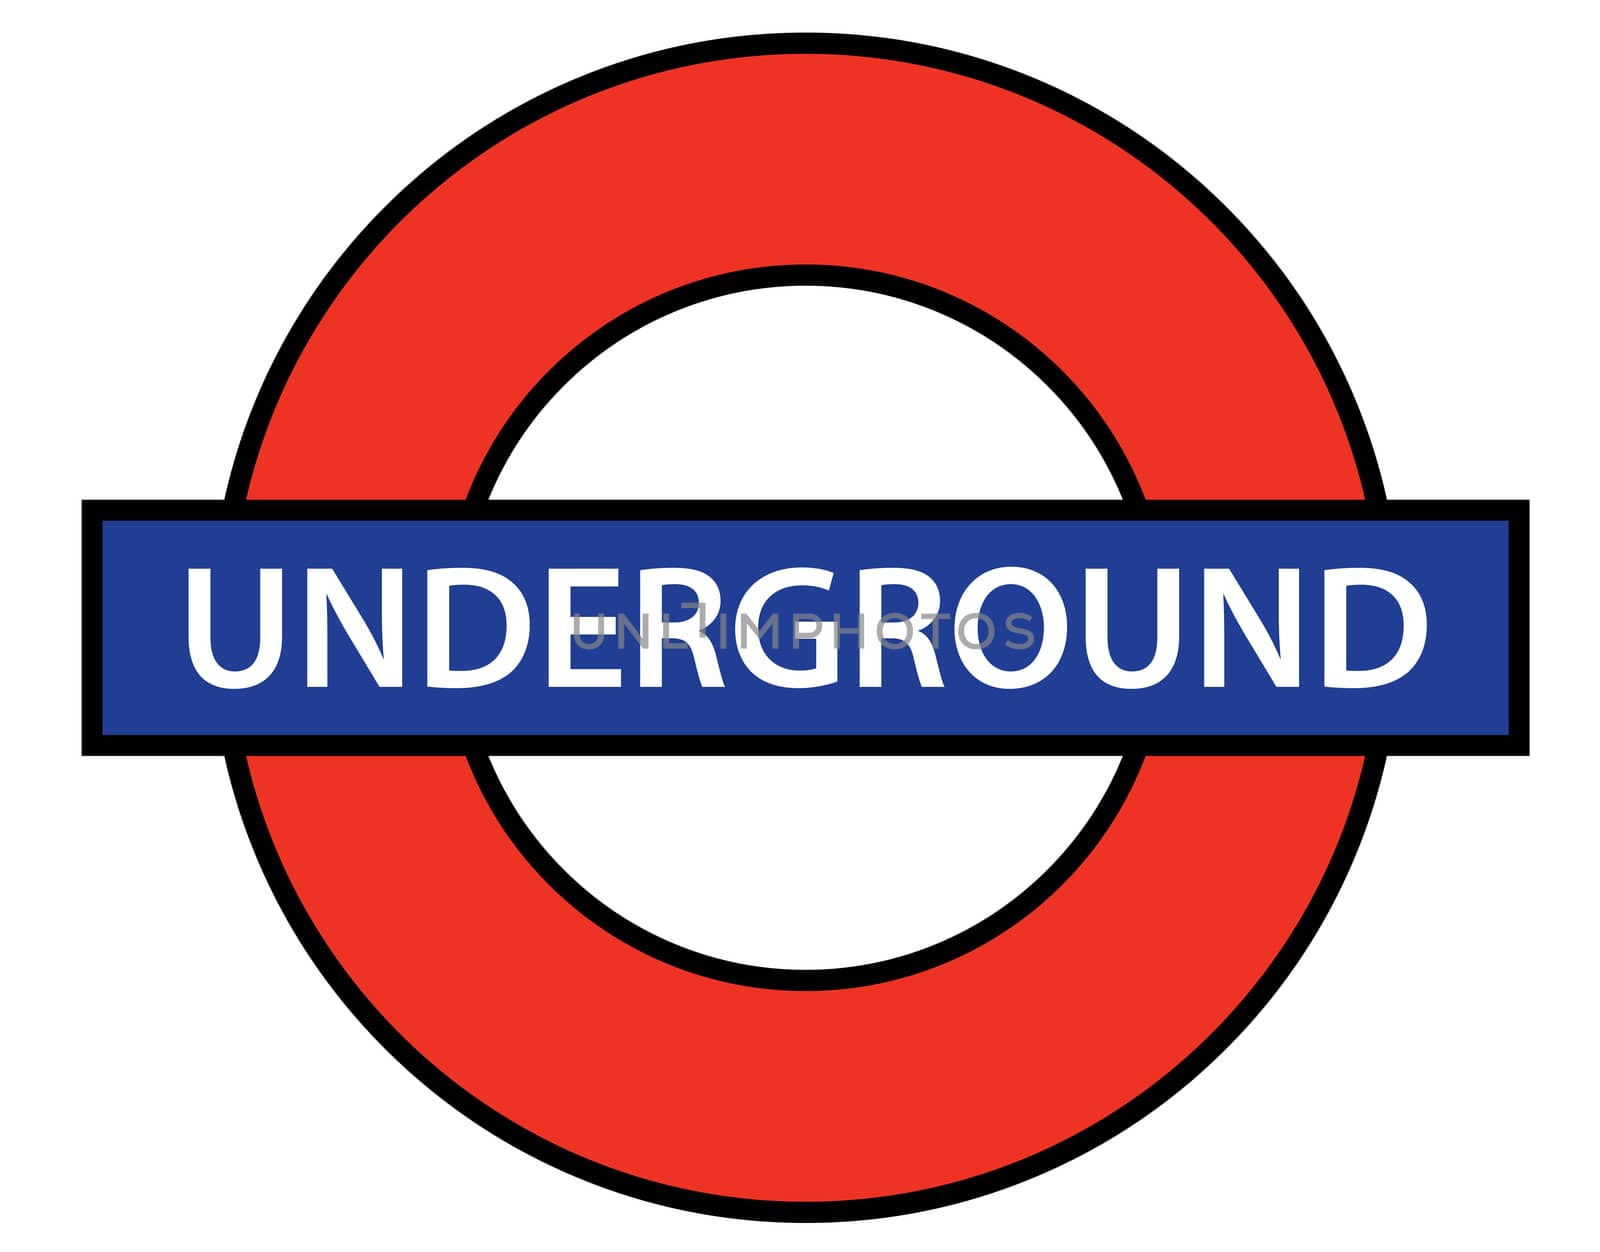 A depiction of the London Underground